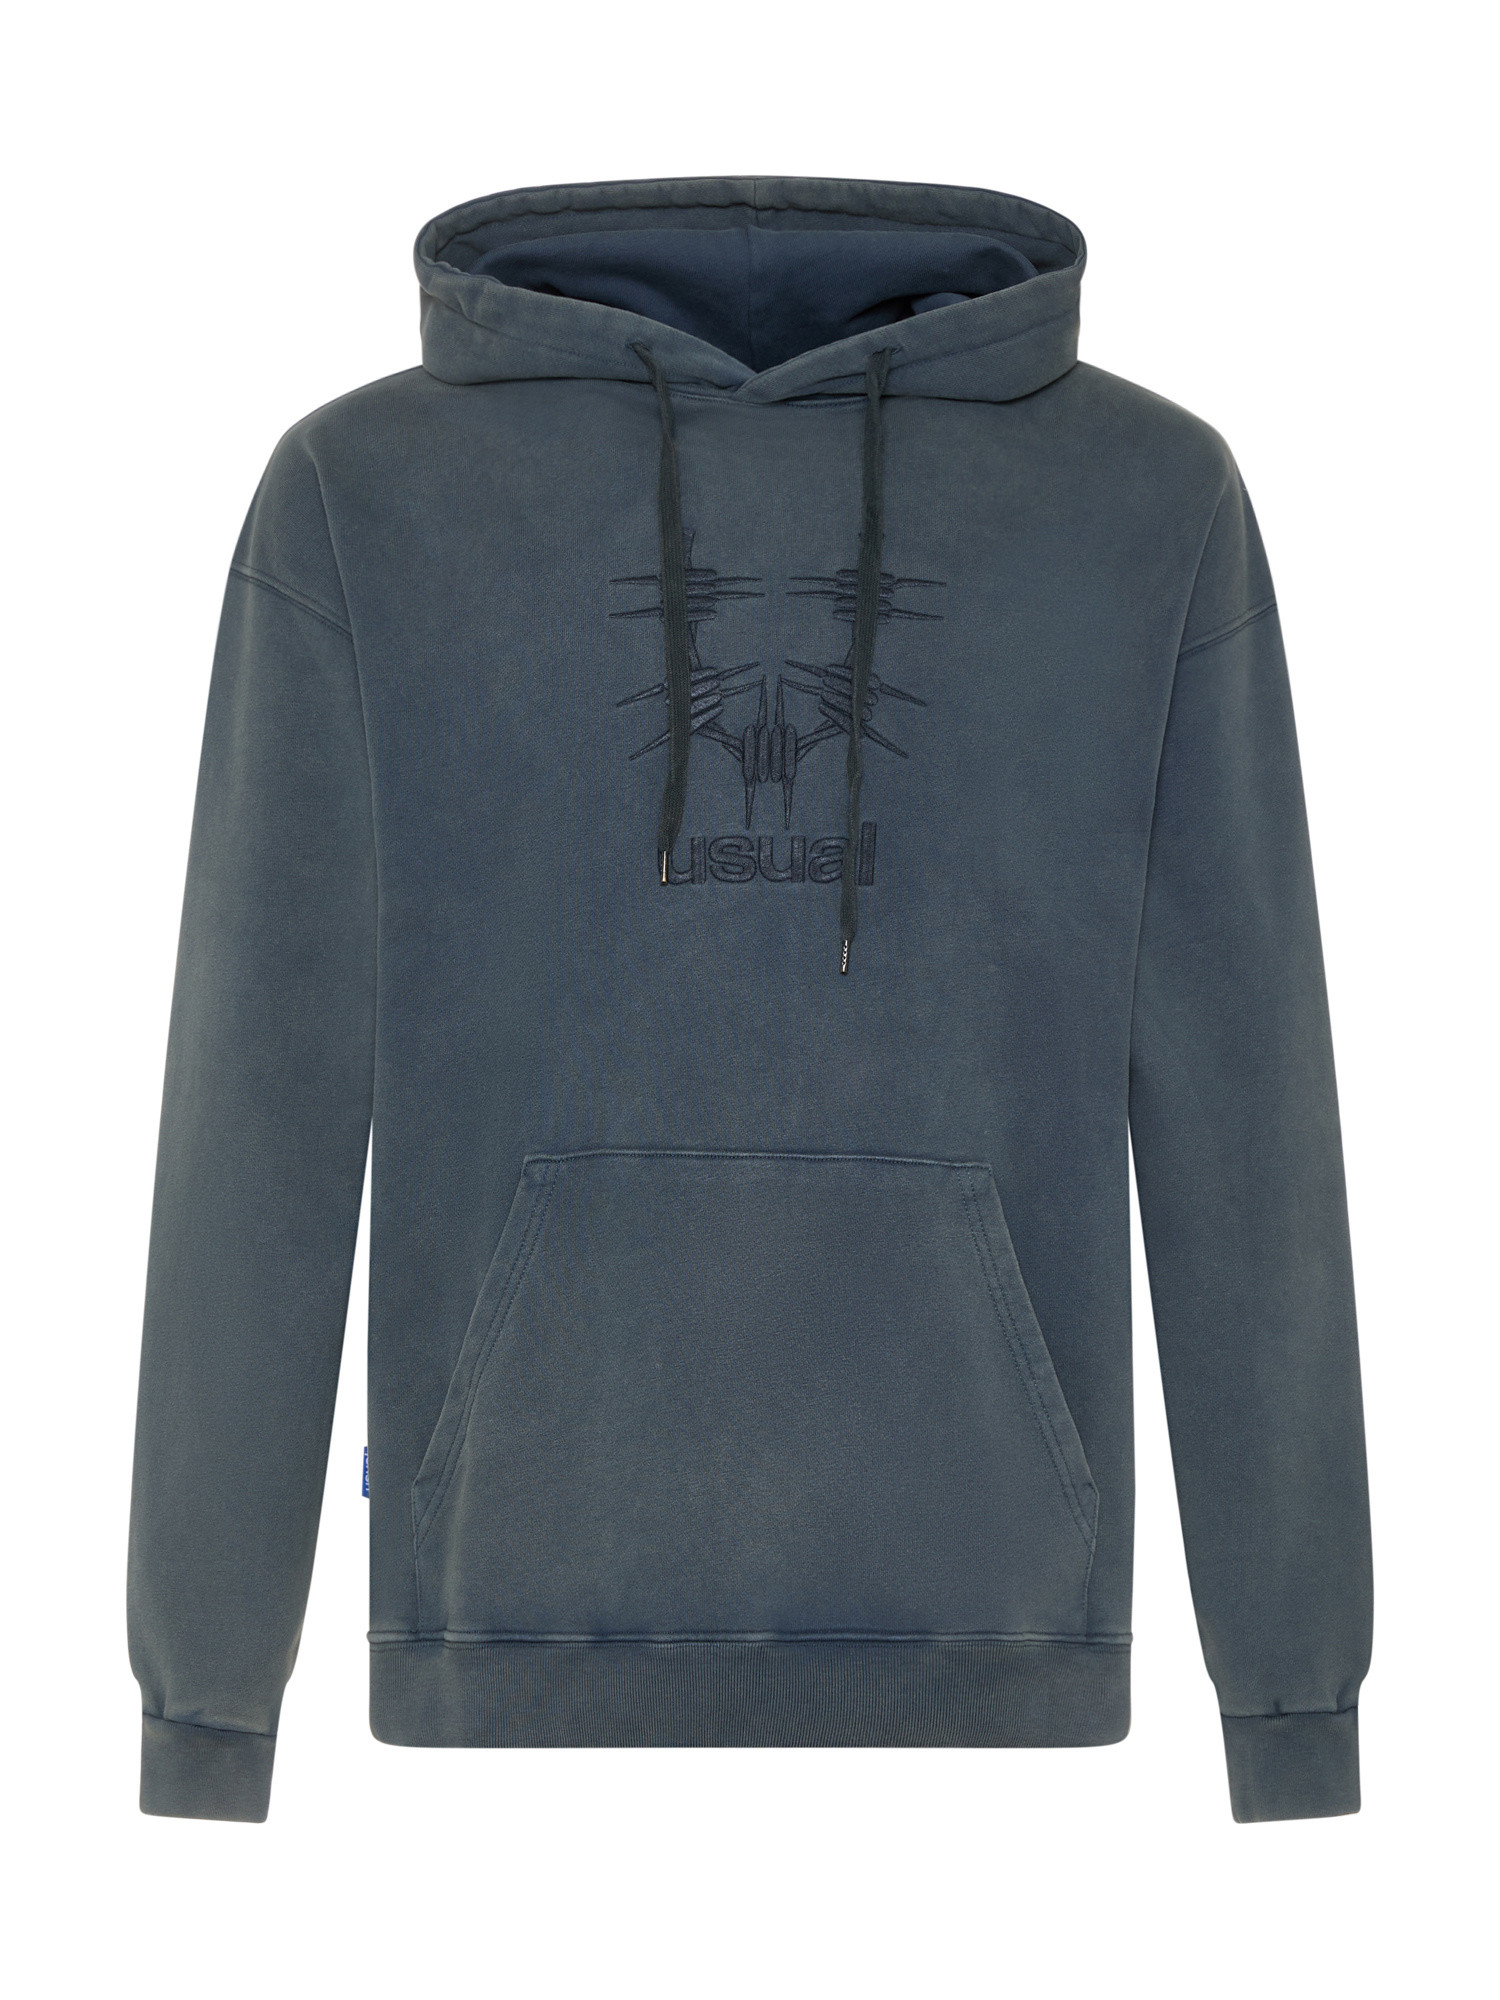 Usual - About Hooded Sweatshirt, Dark Grey, large image number 0